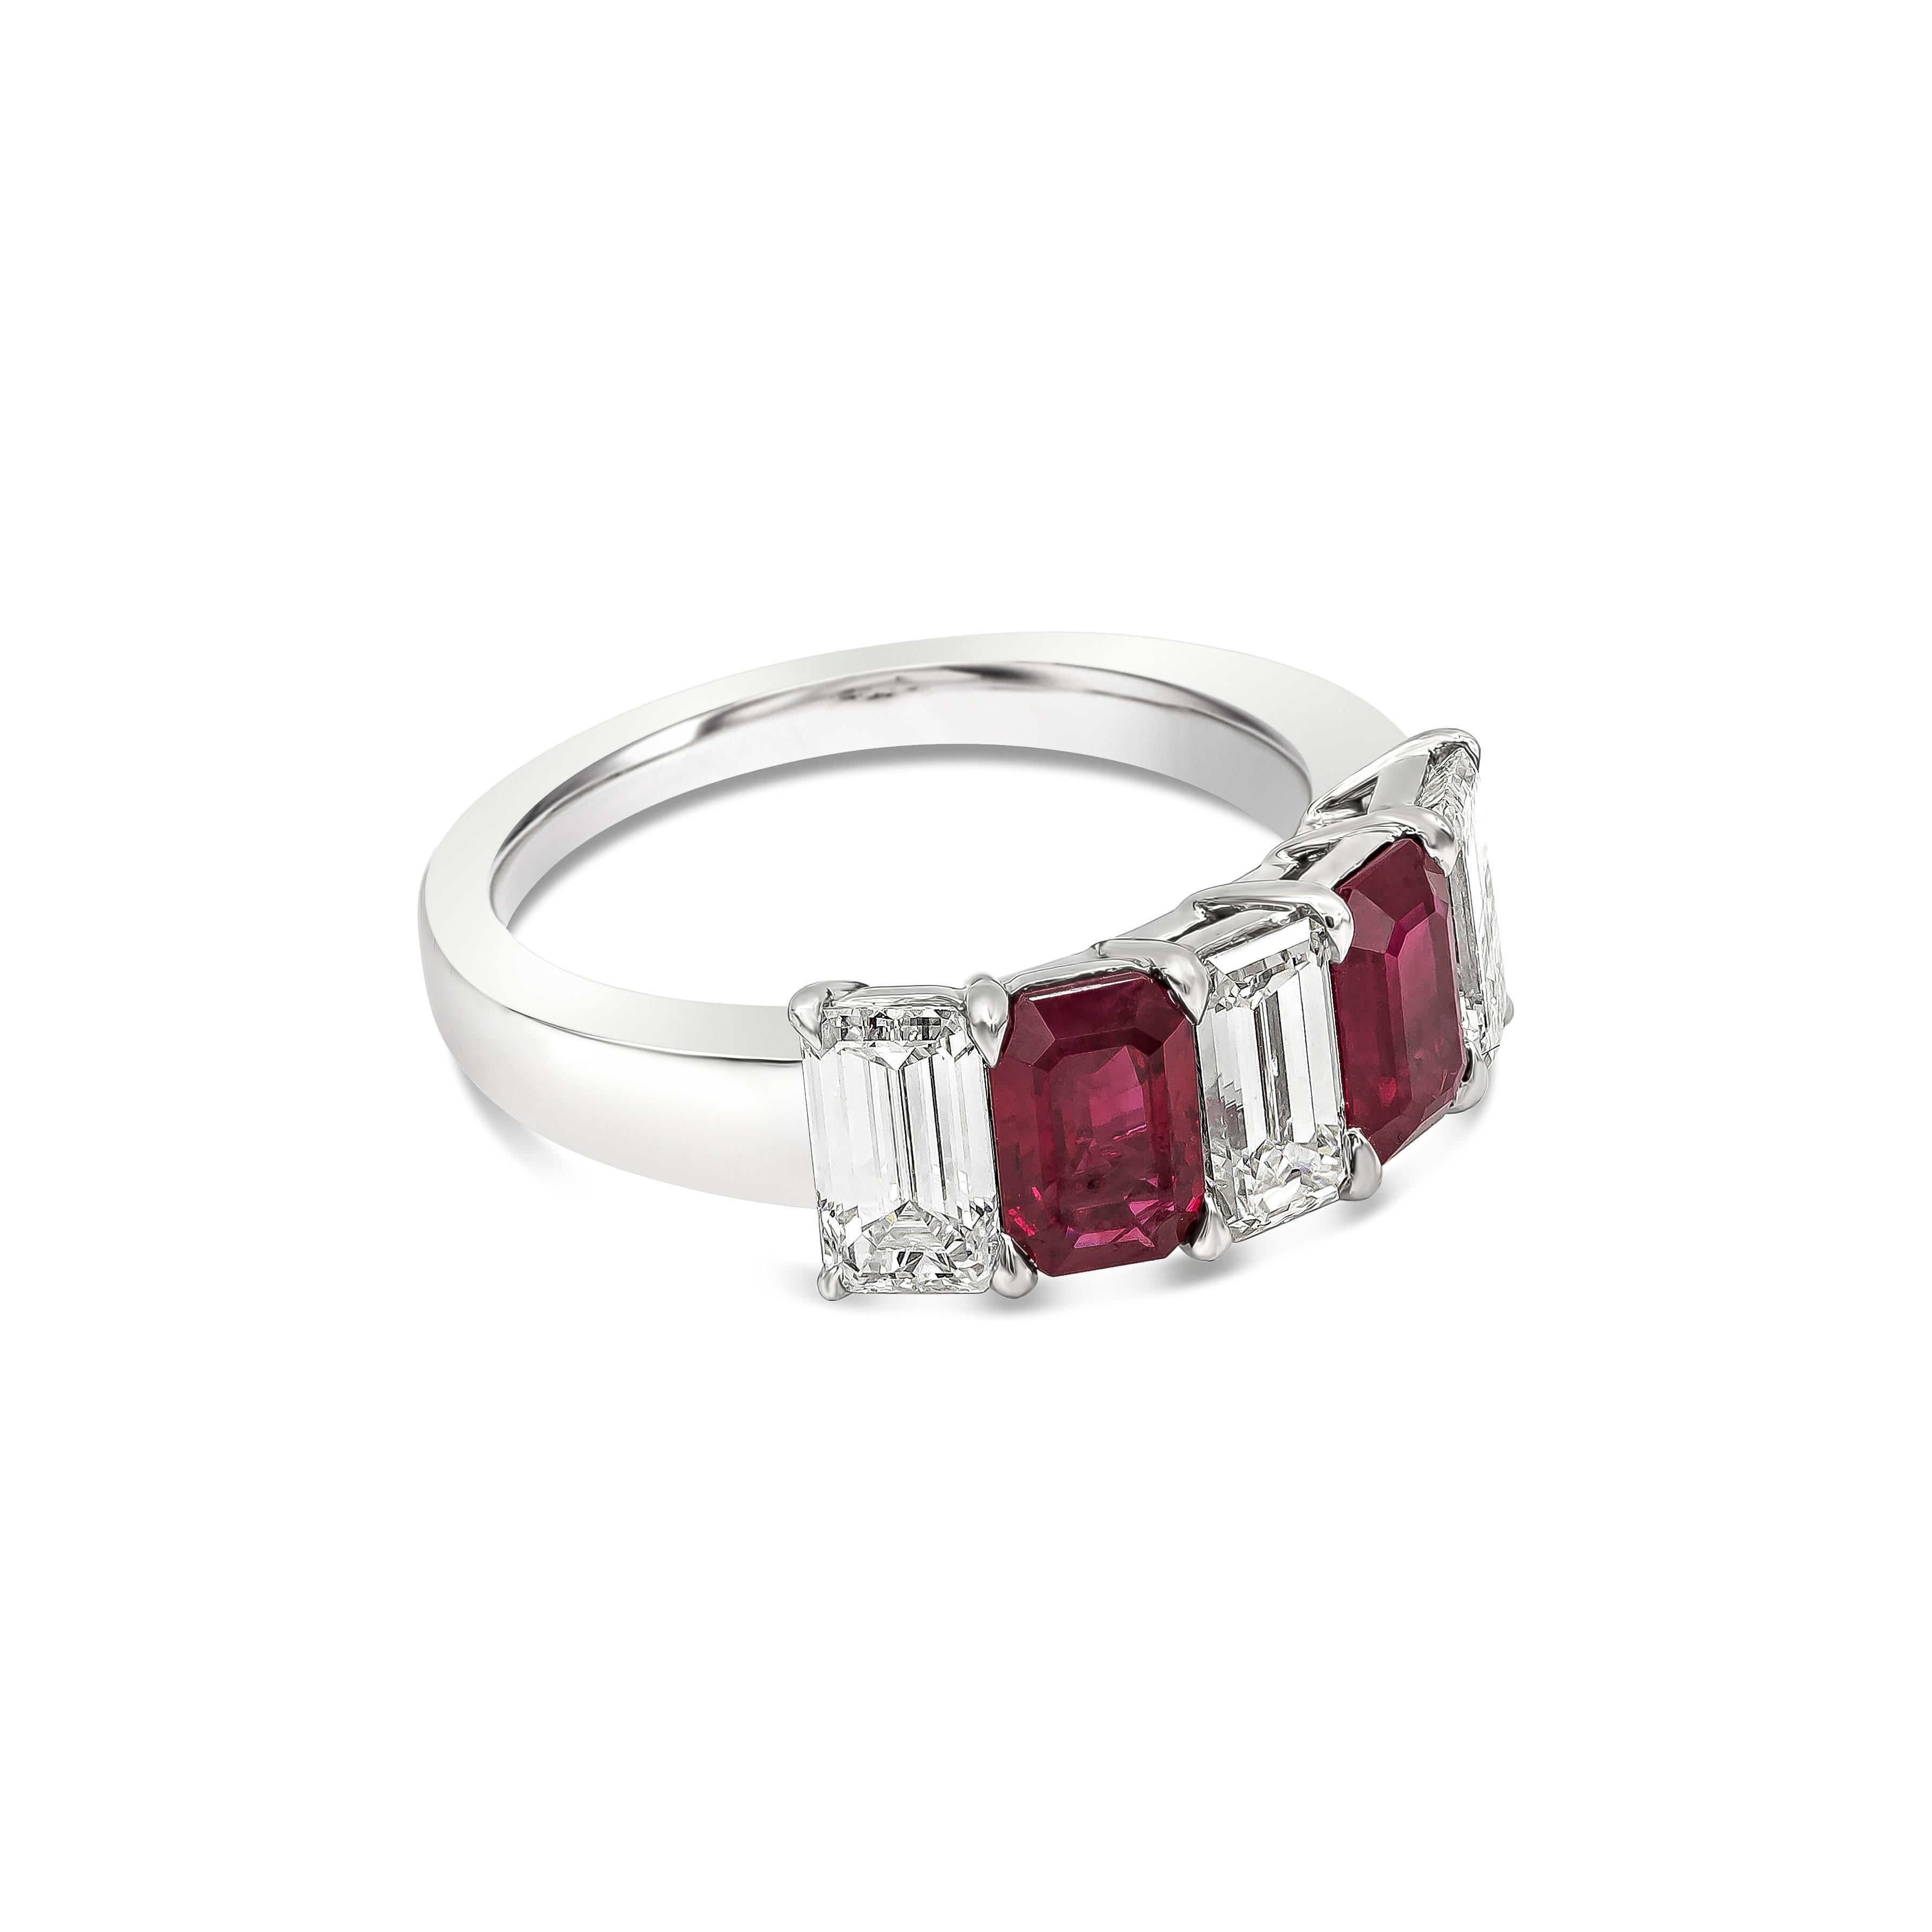 A beautiful and color-rich 5-stone ring showcasing emerald cut diamonds, spaced by emerald cut rubies set in a polished platinum mounting. Diamonds weigh 1.63 carats total; rubies weigh 1.49 carats total. 

Style available in different price ranges.